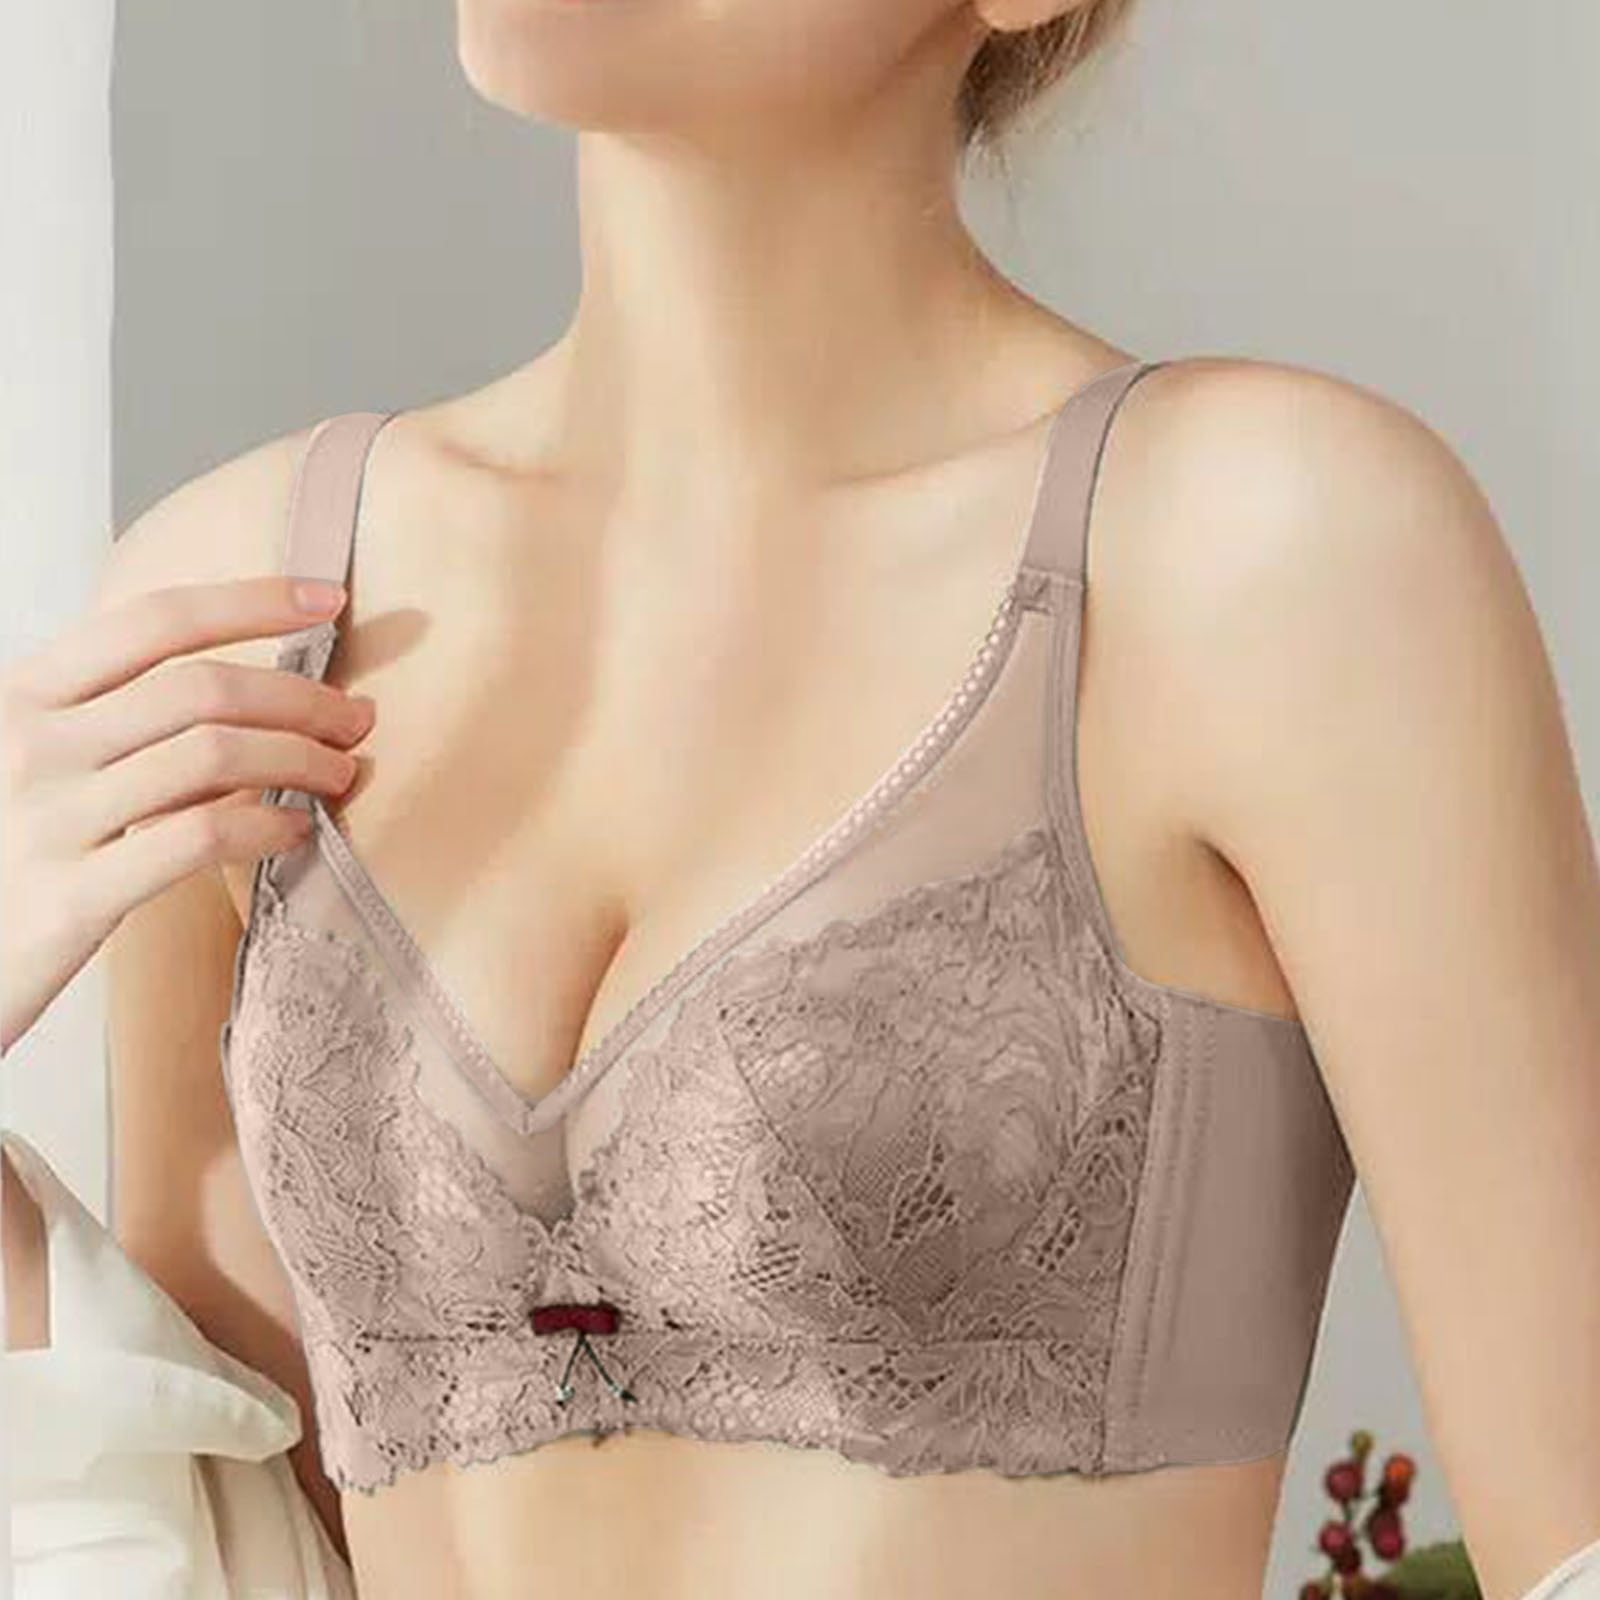 CAICJ98 Lingerie for Women Support Wireless Bra, Lace Bra with  Stay-in-Place Straps, Full-Coverage Wirefree Bra, Tagless for Everyday Wear  Beige,40/90C 